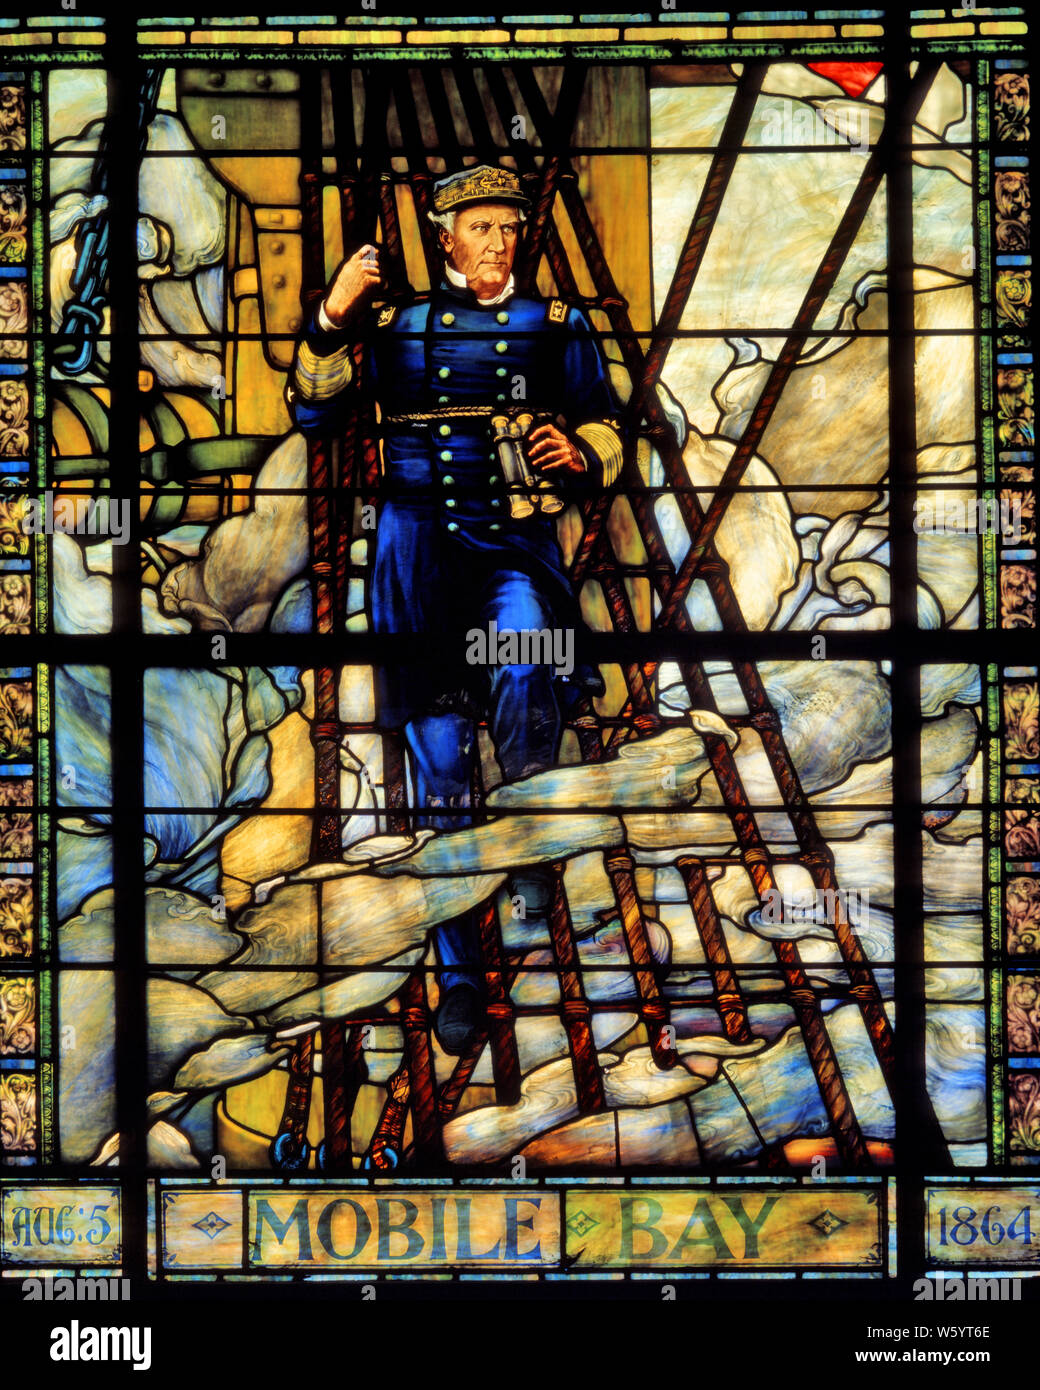 1860s ADMIRAL DAVID FARRAGUT AT 1864 BATTLE OF MOBILE BAY STAINED GLASS WINDOW IN CHAPEL AT US NAVAL ACADEMY ANNAPOLIS MD USA - km5760 VRE001 HARS MALES FORCE OFFICER WARS ADVENTURE STRENGTH STRATEGY ACADEMY MD NAVAL DAVID LEADERSHIP PRIDE AT IN UNIFORMS FORCES CONCEPTUAL 1860s NAVIES ANNAPOLIS AHEAD FARRAGUT REAR ADMIRAL USN DAMN THE TORPEDOES HERO STAINED GLASS 1864 ADMIRAL AMERICAN CIVIL WAR BATTLES CAUCASIAN ETHNICITY CHAPEL CIVIL WAR CONFLICTS OLD FASHIONED Stock Photo